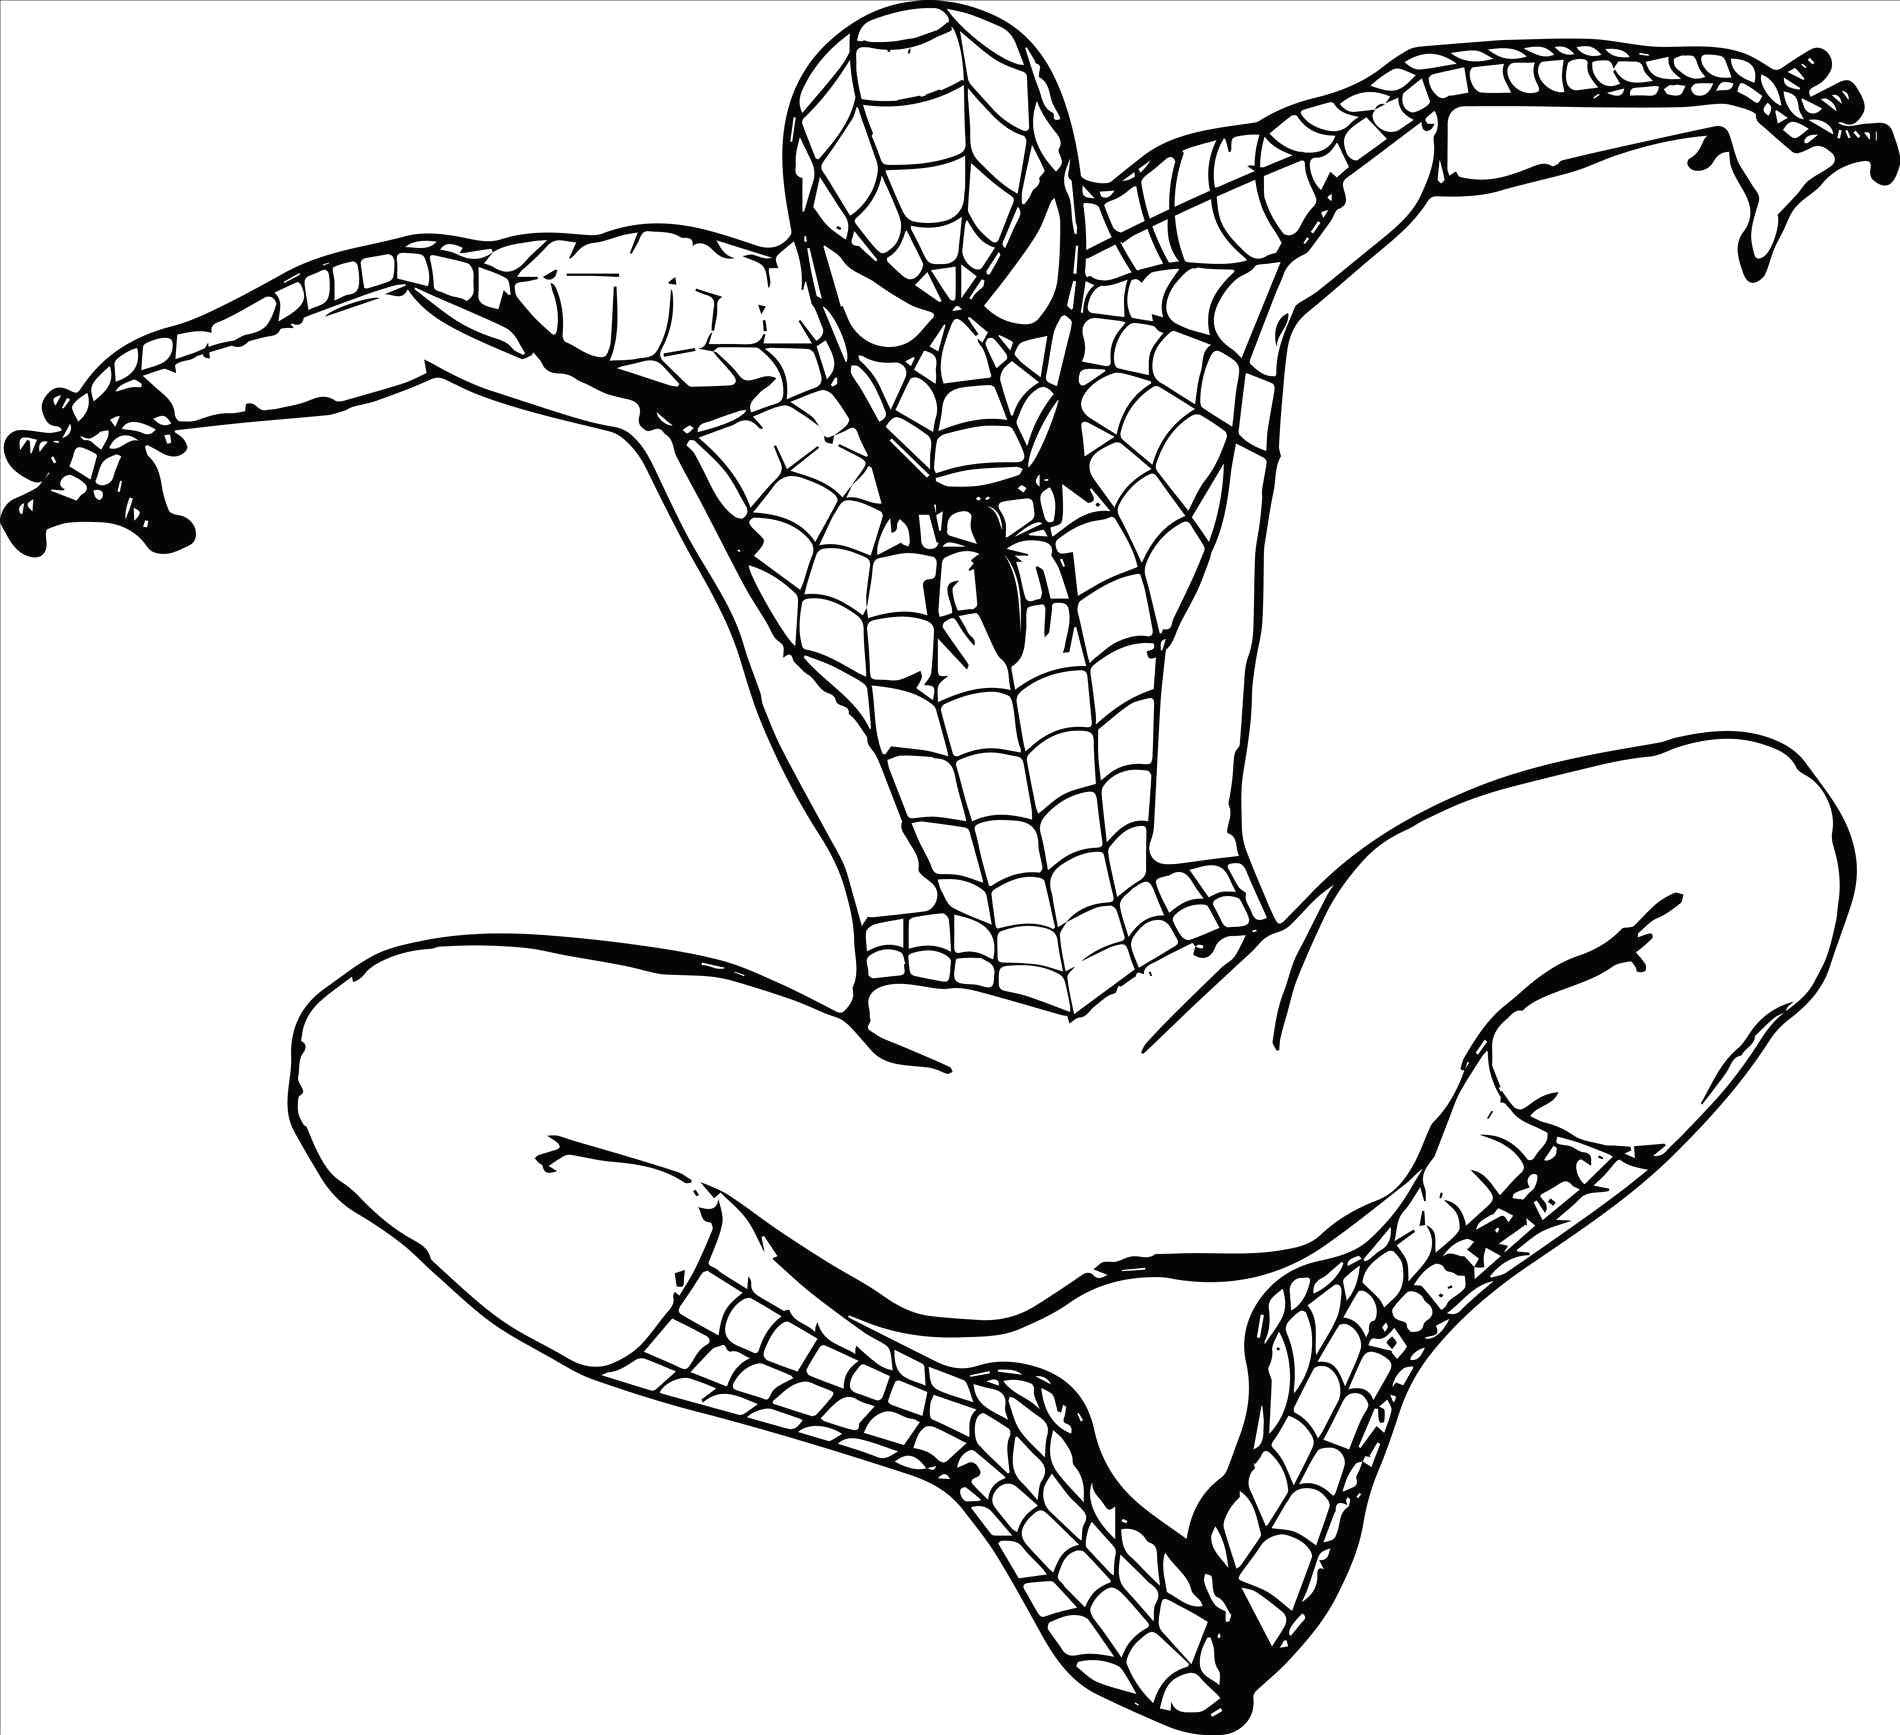 Easy Up Drawings Superheroes Easy to Draw Spiderman Coloring Pages Luxury 0 0d